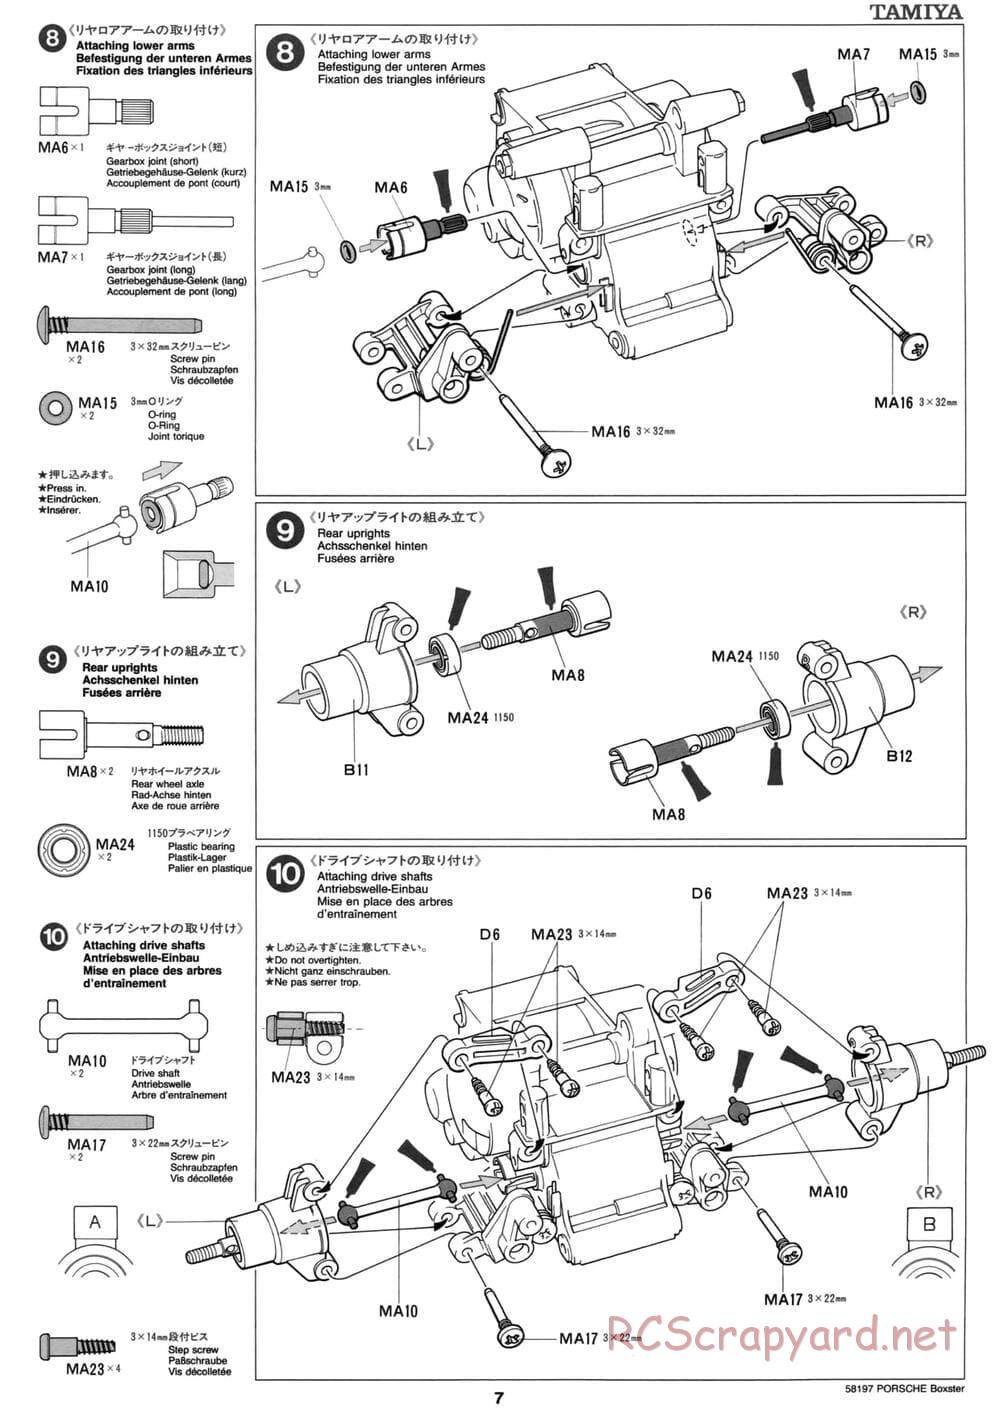 Tamiya - Porsche Boxster - M02L Chassis - Manual - Page 7